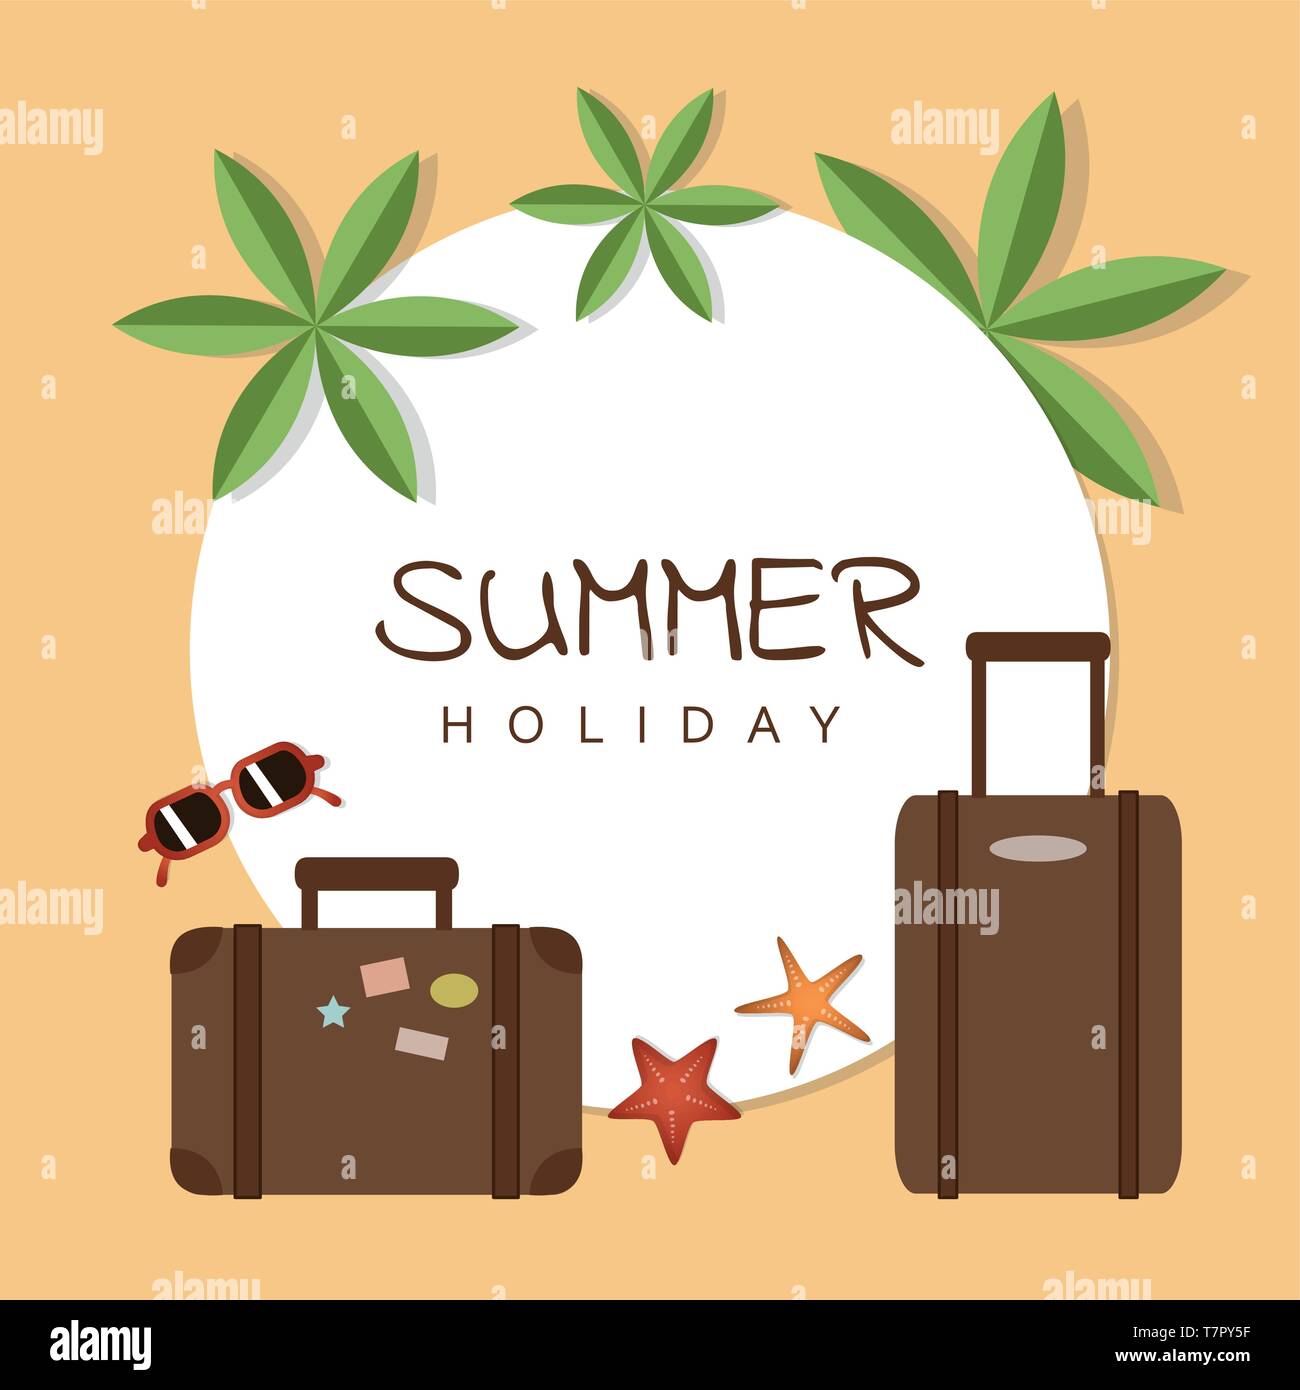 summer holiday design with suitcase palm sunglasses and starfish vector illustration EPS10 Stock Vector